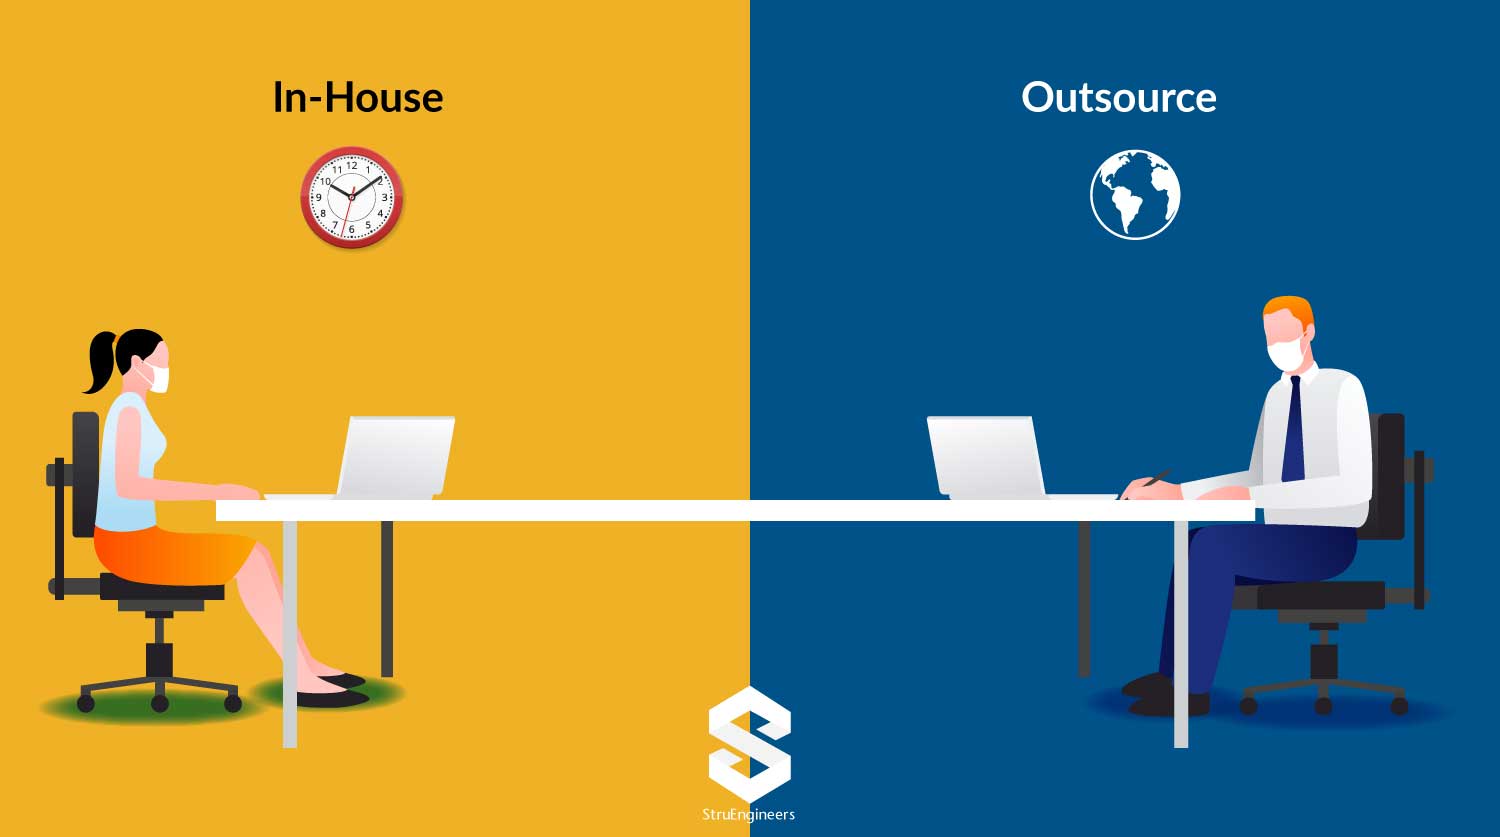 What is better during uncertain times Outsourcing or Hiring